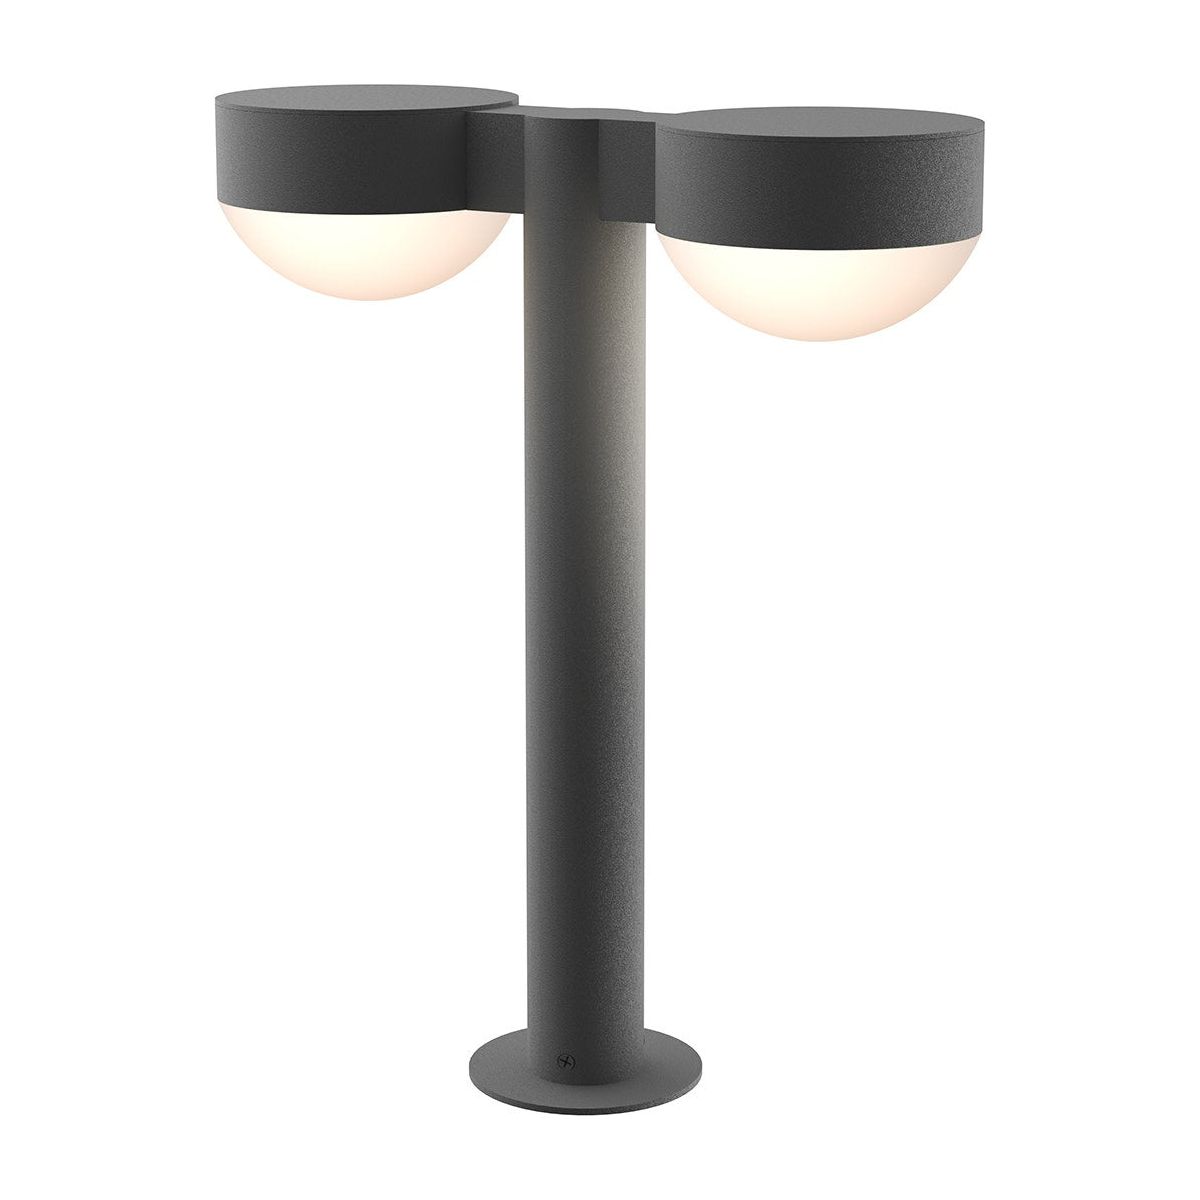 REALS 16" LED Double Bollard with Plate Cap and Dome Lens